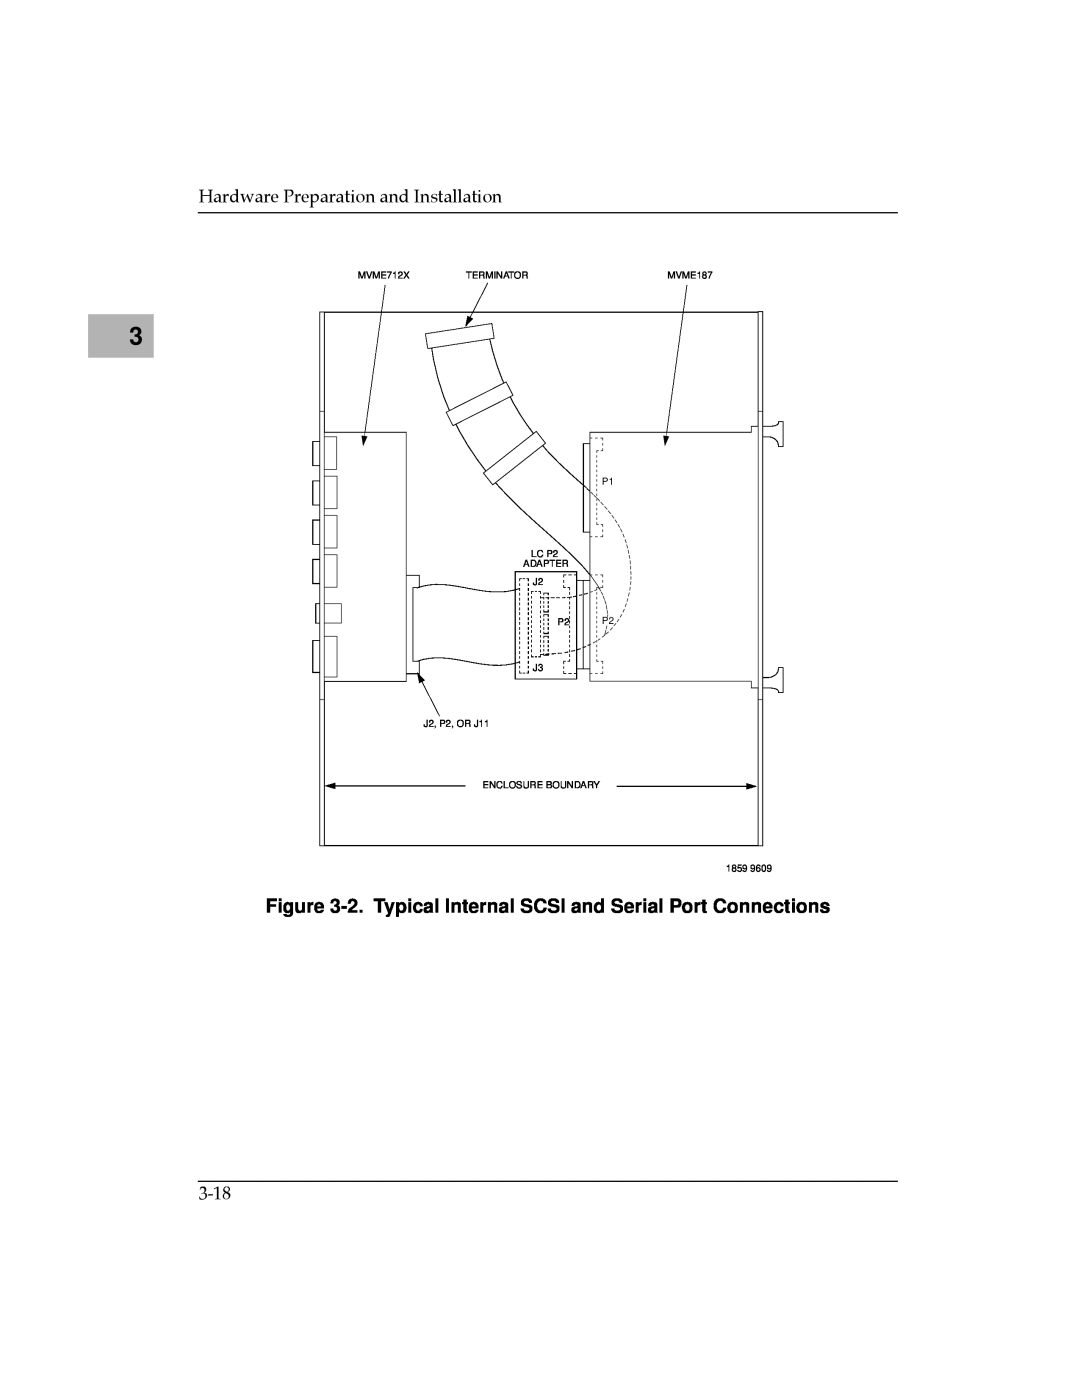 Motorola MVME187 manual 2. Typical Internal SCSI and Serial Port Connections, Hardware Preparation and Installation, 3-18 